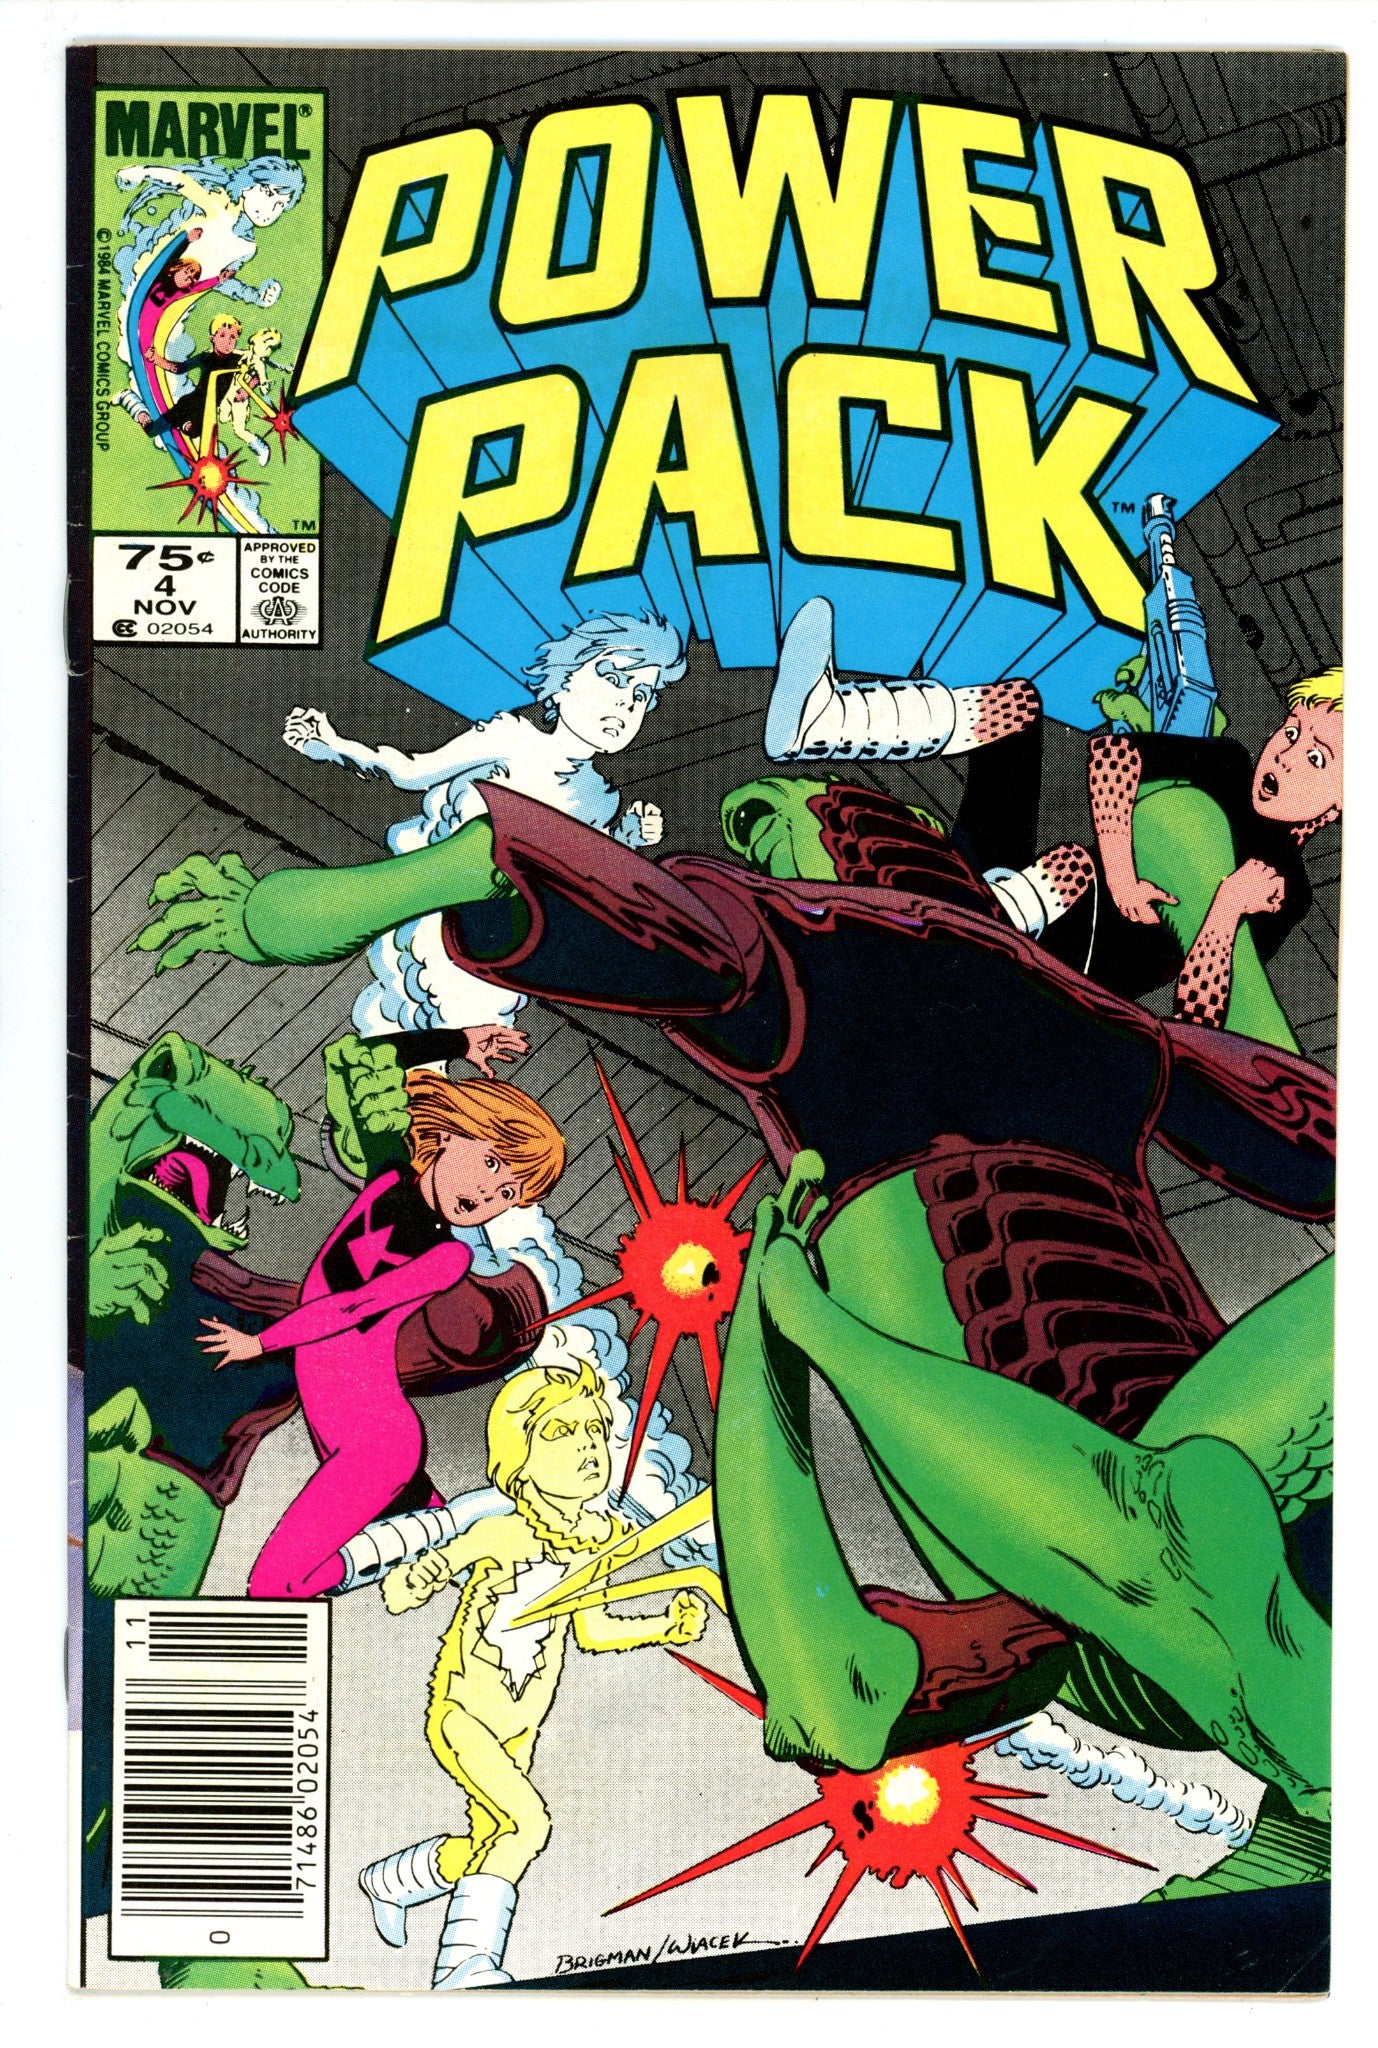 Power Pack Vol 1 4 FN- (5.5) (1984) Canadian Price Variant 